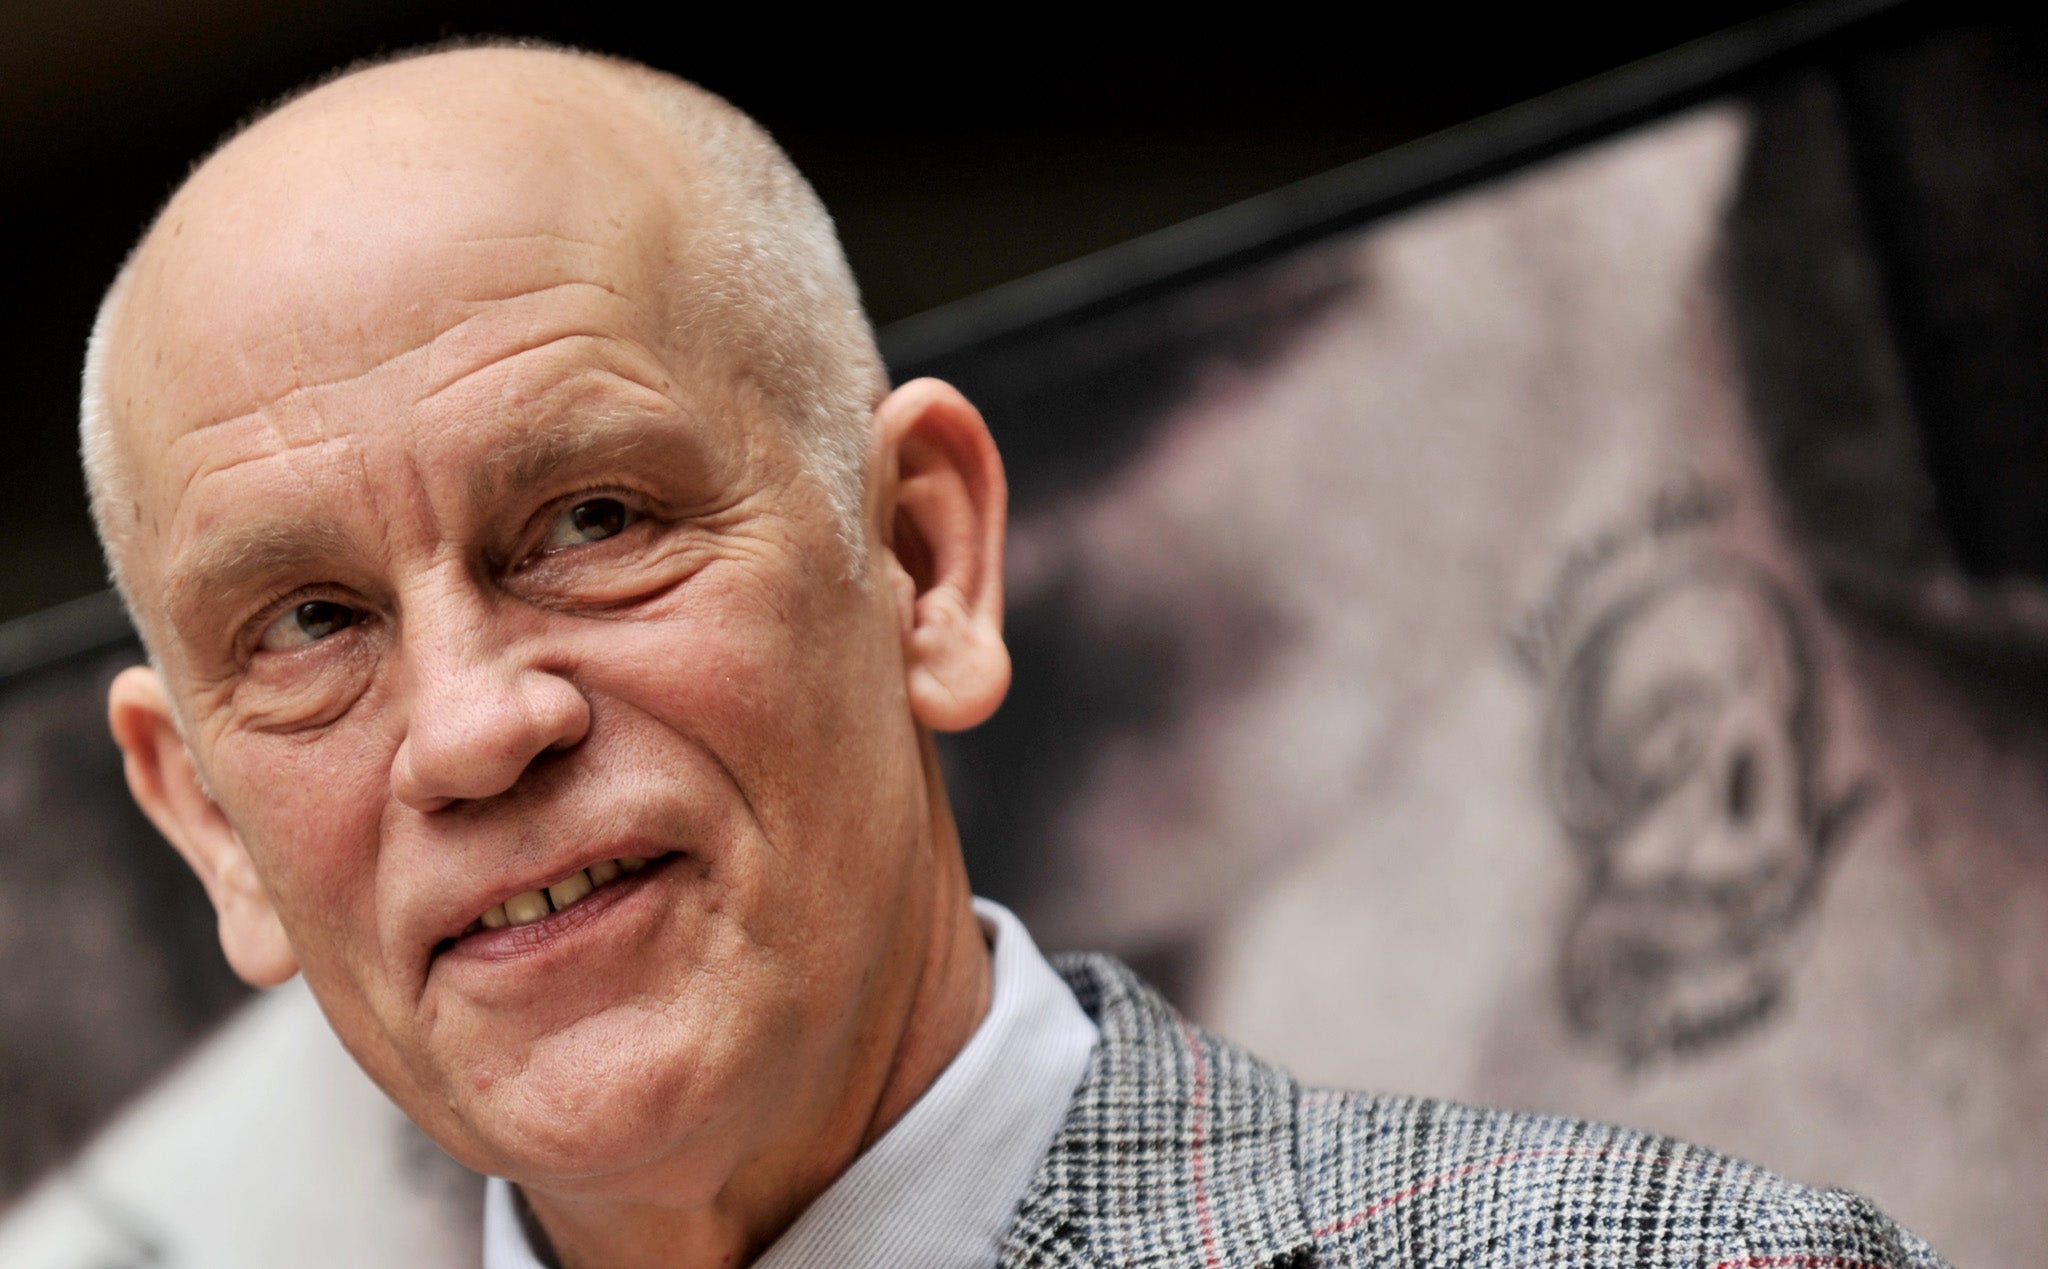 John Malkovich has been credited with saving the life of a 77-year-old man who accidentally slit his throat on scaffolding